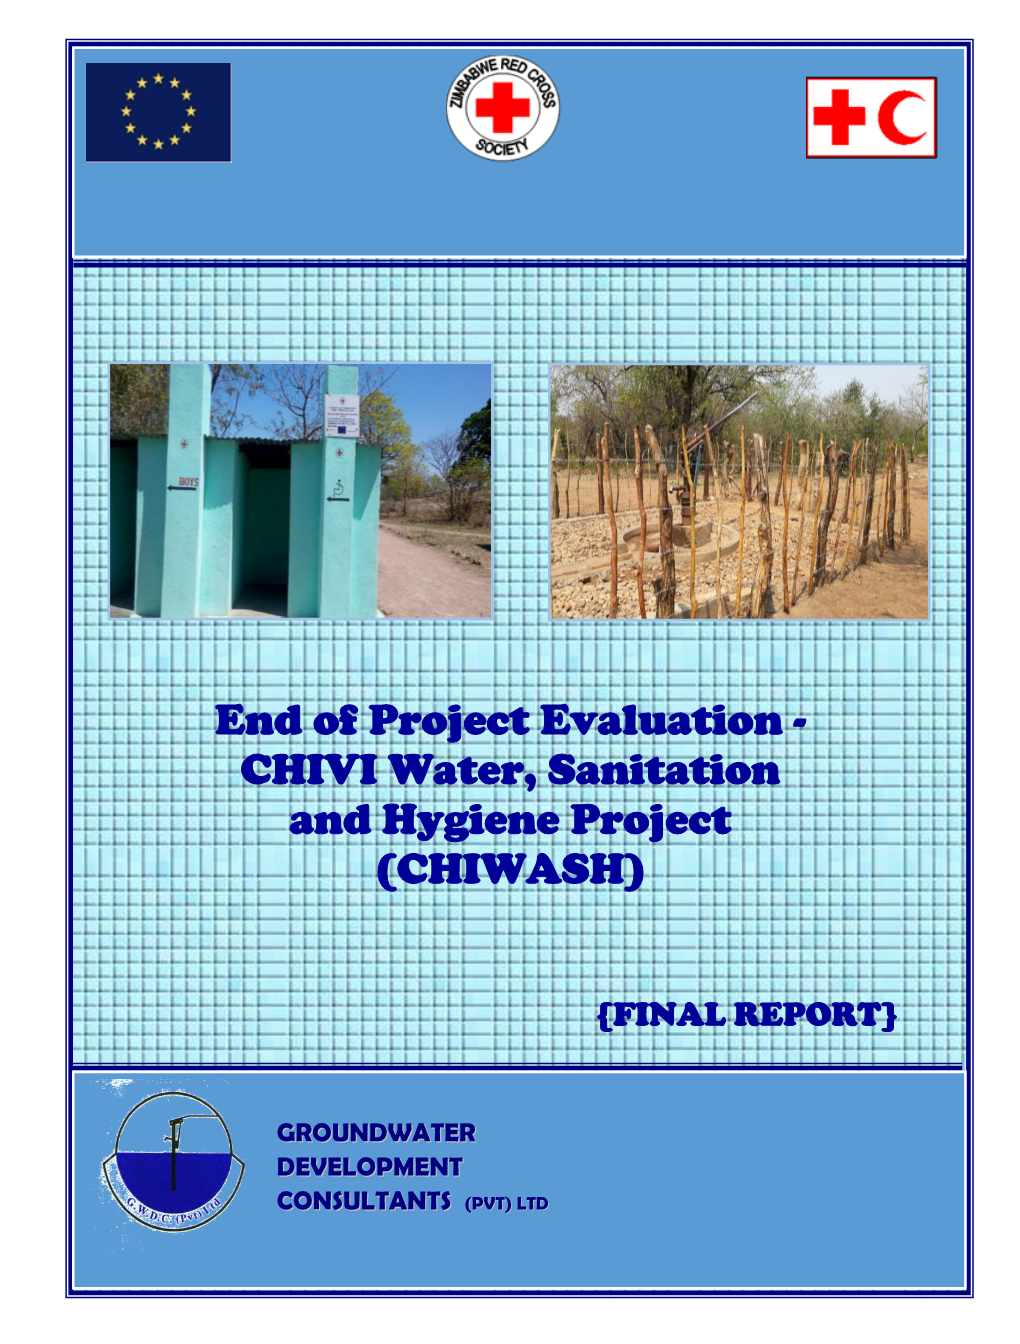 CHIVI Water, Sanitation and Hygiene Project (CHIWASH)